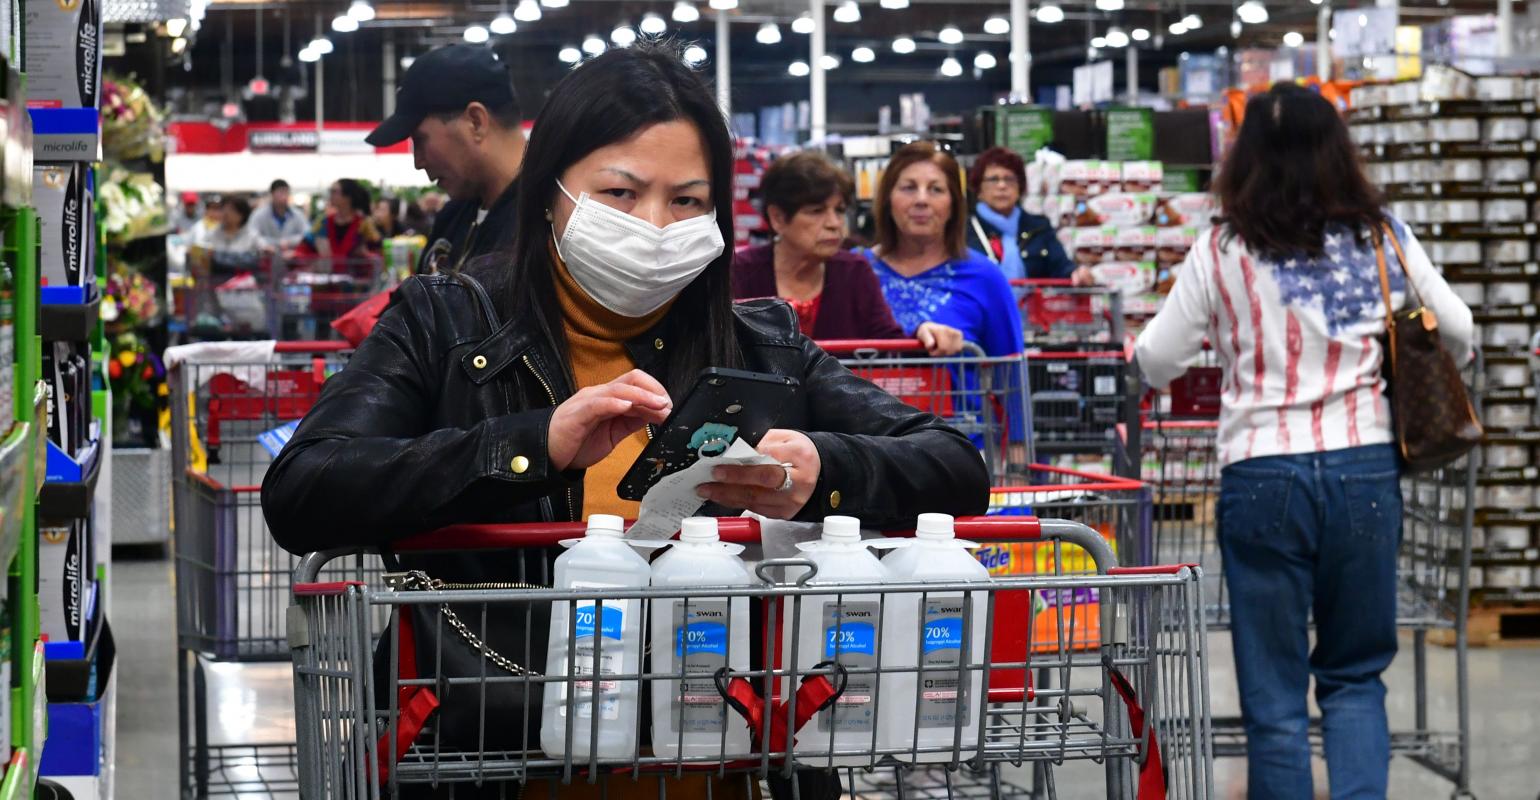 Costco Sales Jump With Coronavirus Fears Lifting February Results